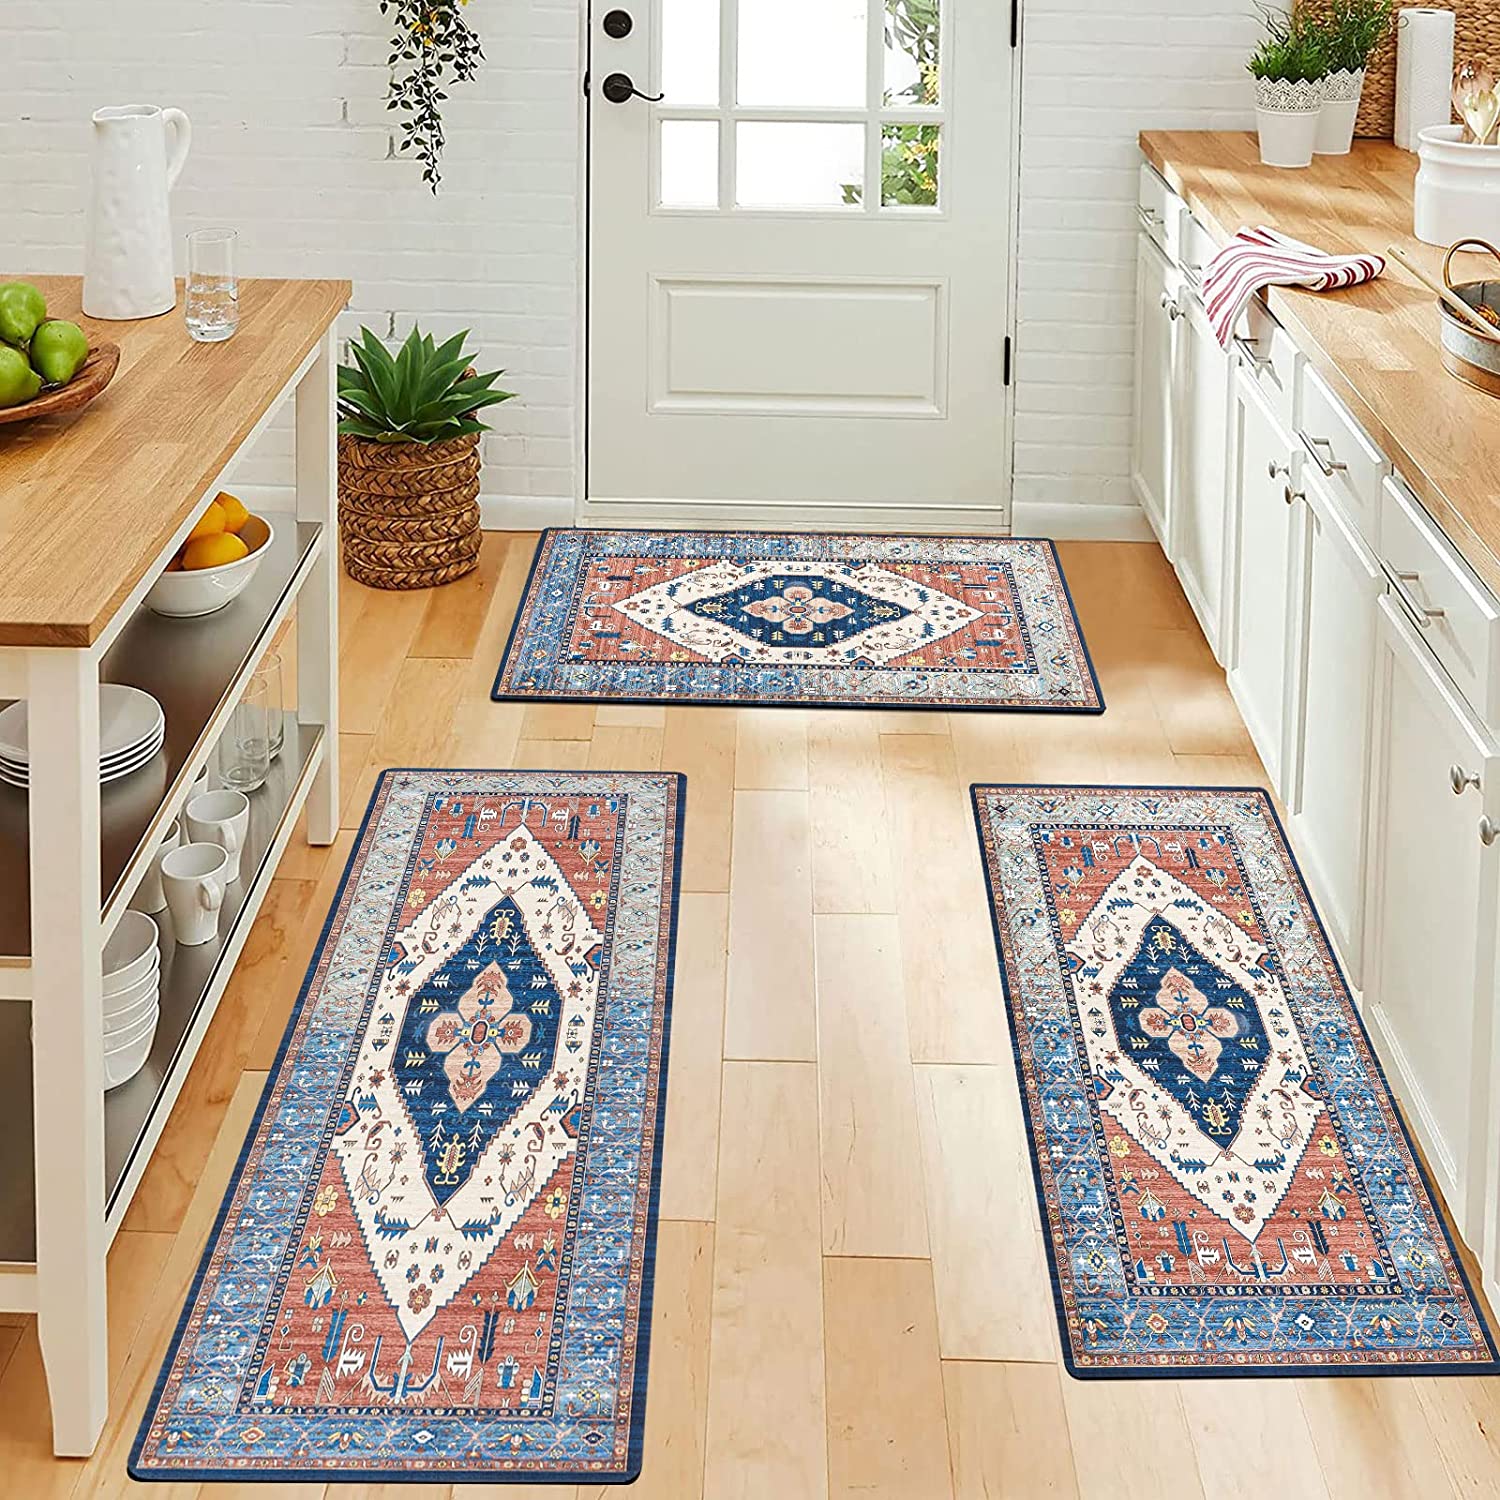 Set of 2 Navy Blue Kitchen Rugs, Cushioned Slip Resistant Mats for Dining  Room Floor, Office, Sink, Laundry